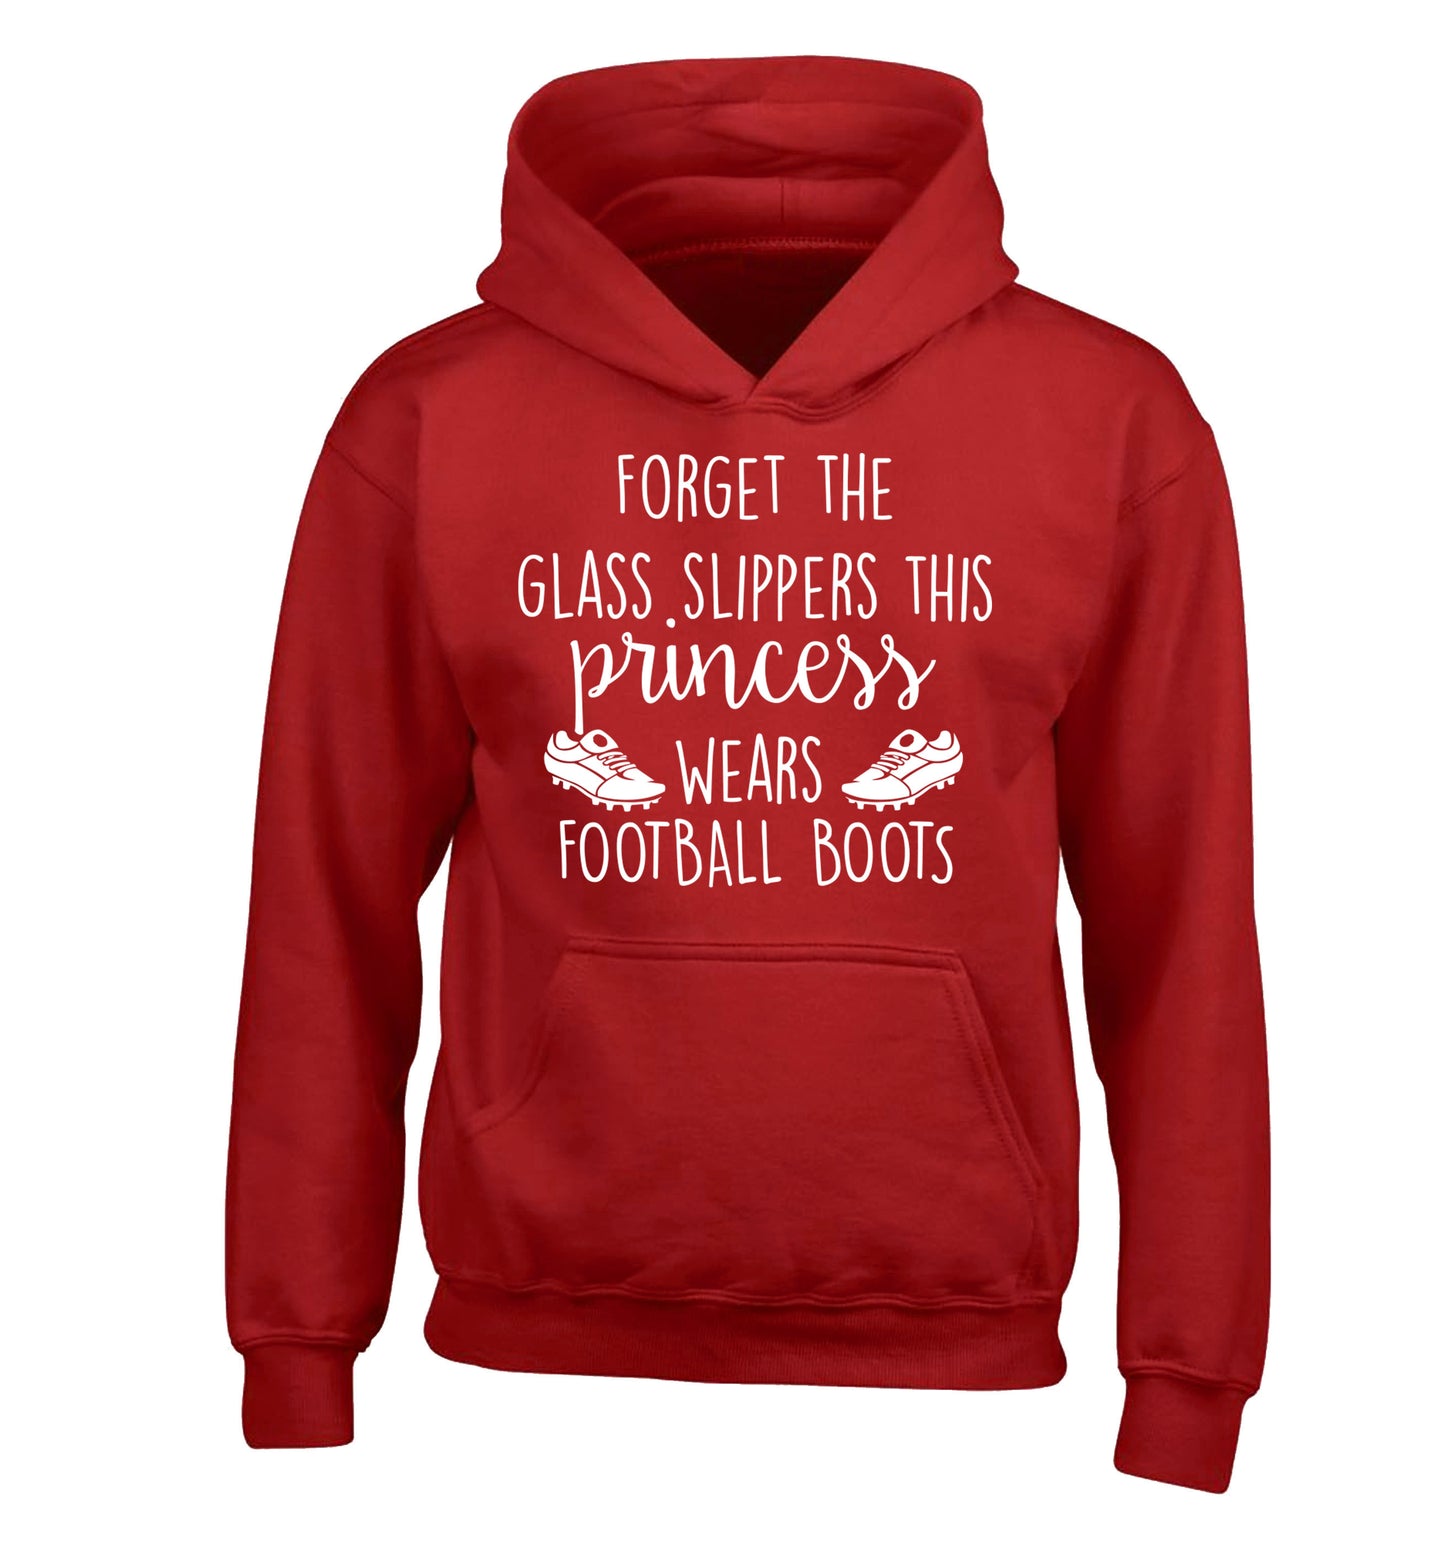 Forget the glass slippers this princess wears football boots children's red hoodie 12-14 Years